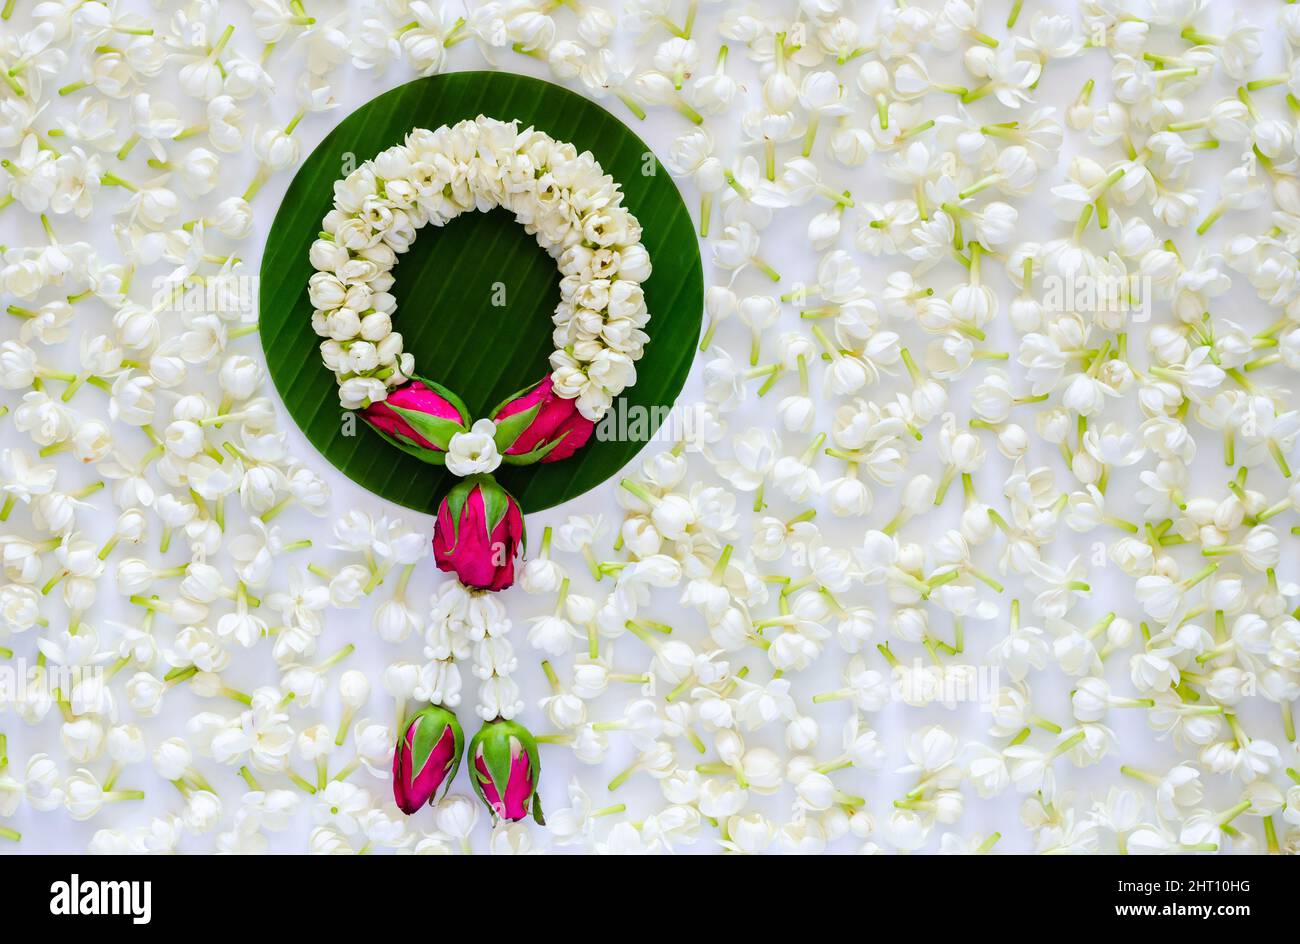 Jasmine garland puts on banana leaf with blooming jasmine flowers background for Songkran festival concept. Stock Photo